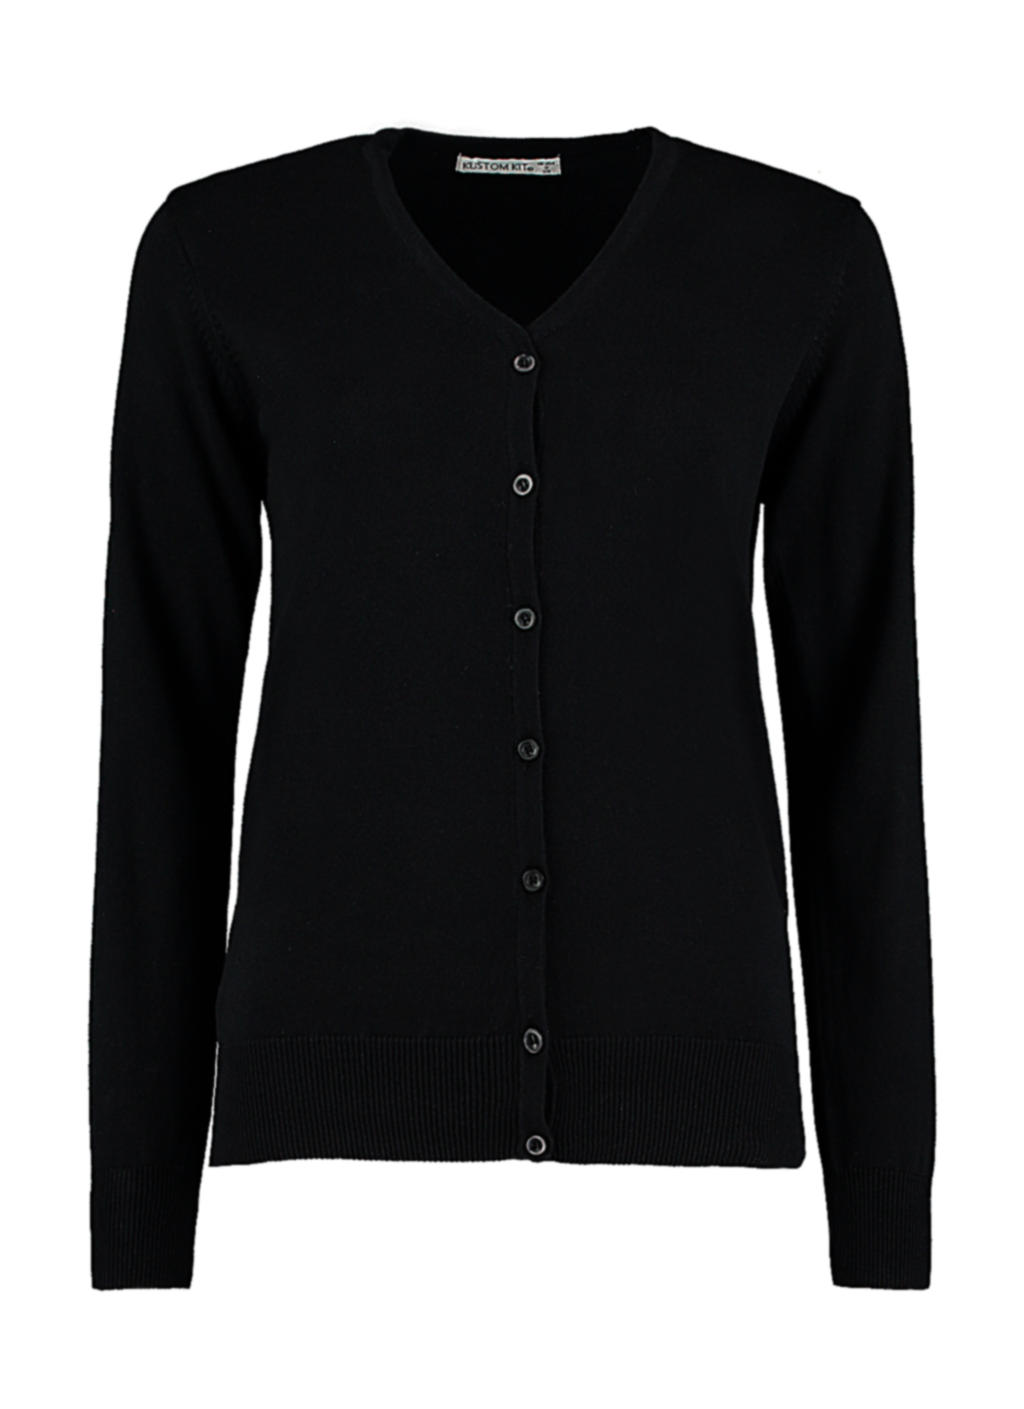  Womens Classic Fit Arundel V Neck Cardigan in Farbe Black